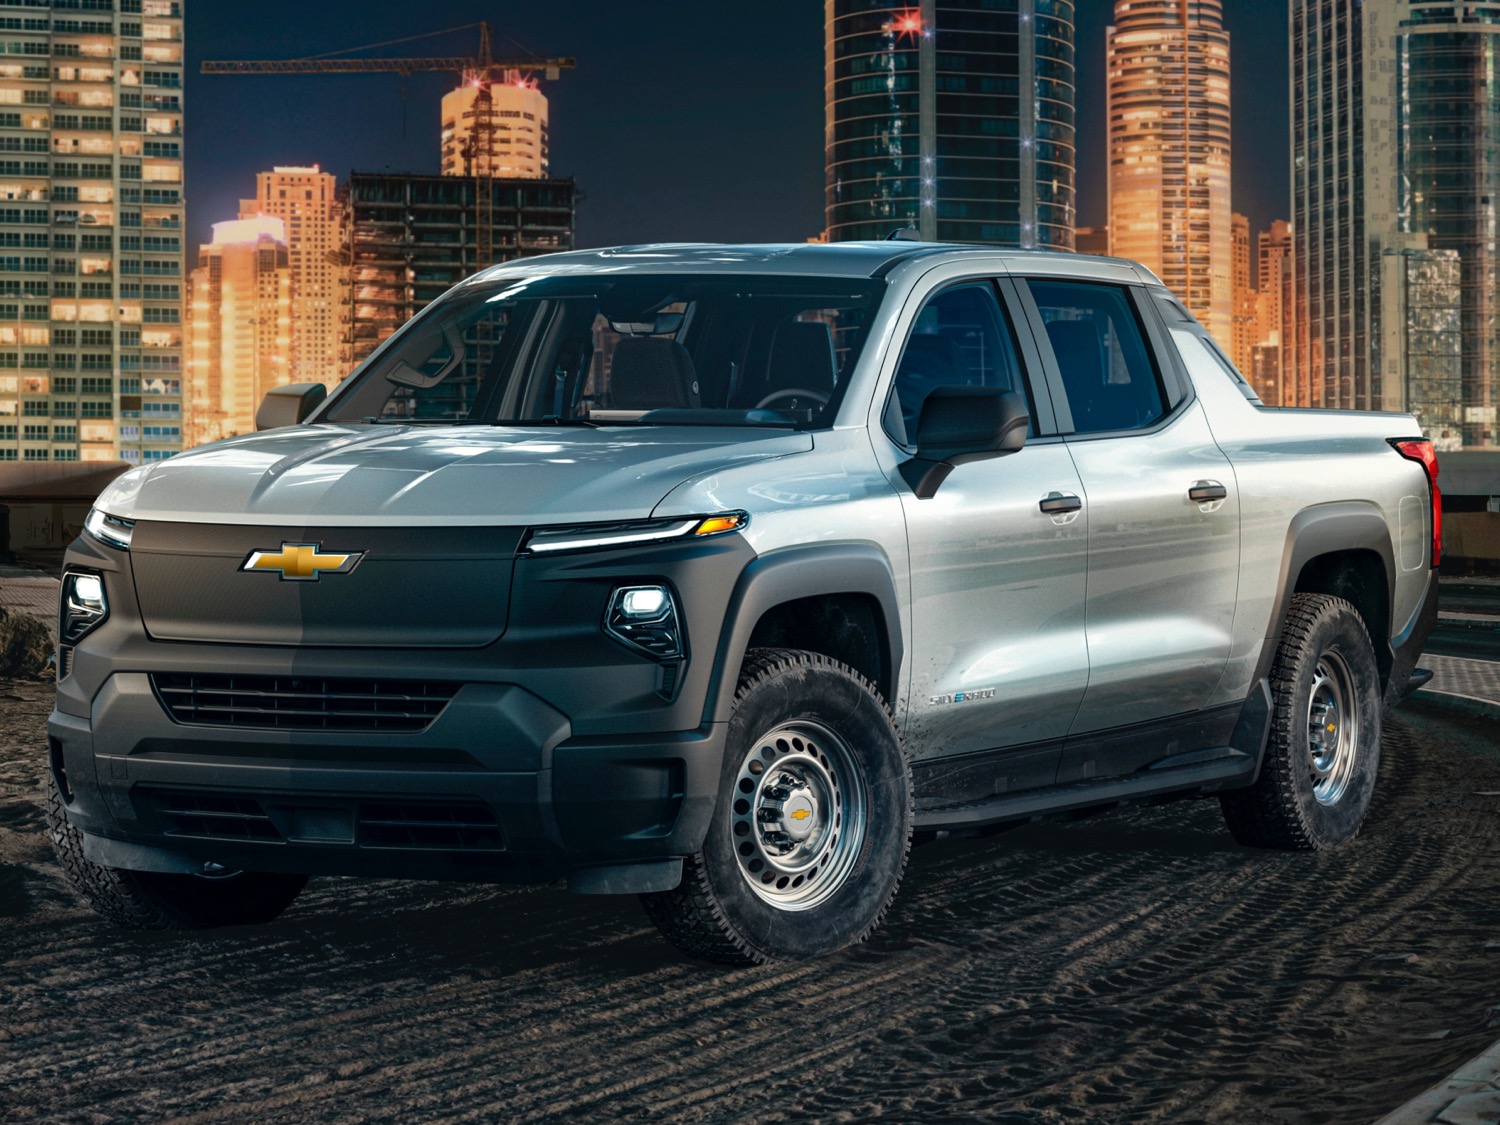 Chevrolet Silverado EV: 400 Miles of Range, 8,000 Lbs Towing Capacity & Other Features Announced Ahead of Collosal Release in Fall 2023